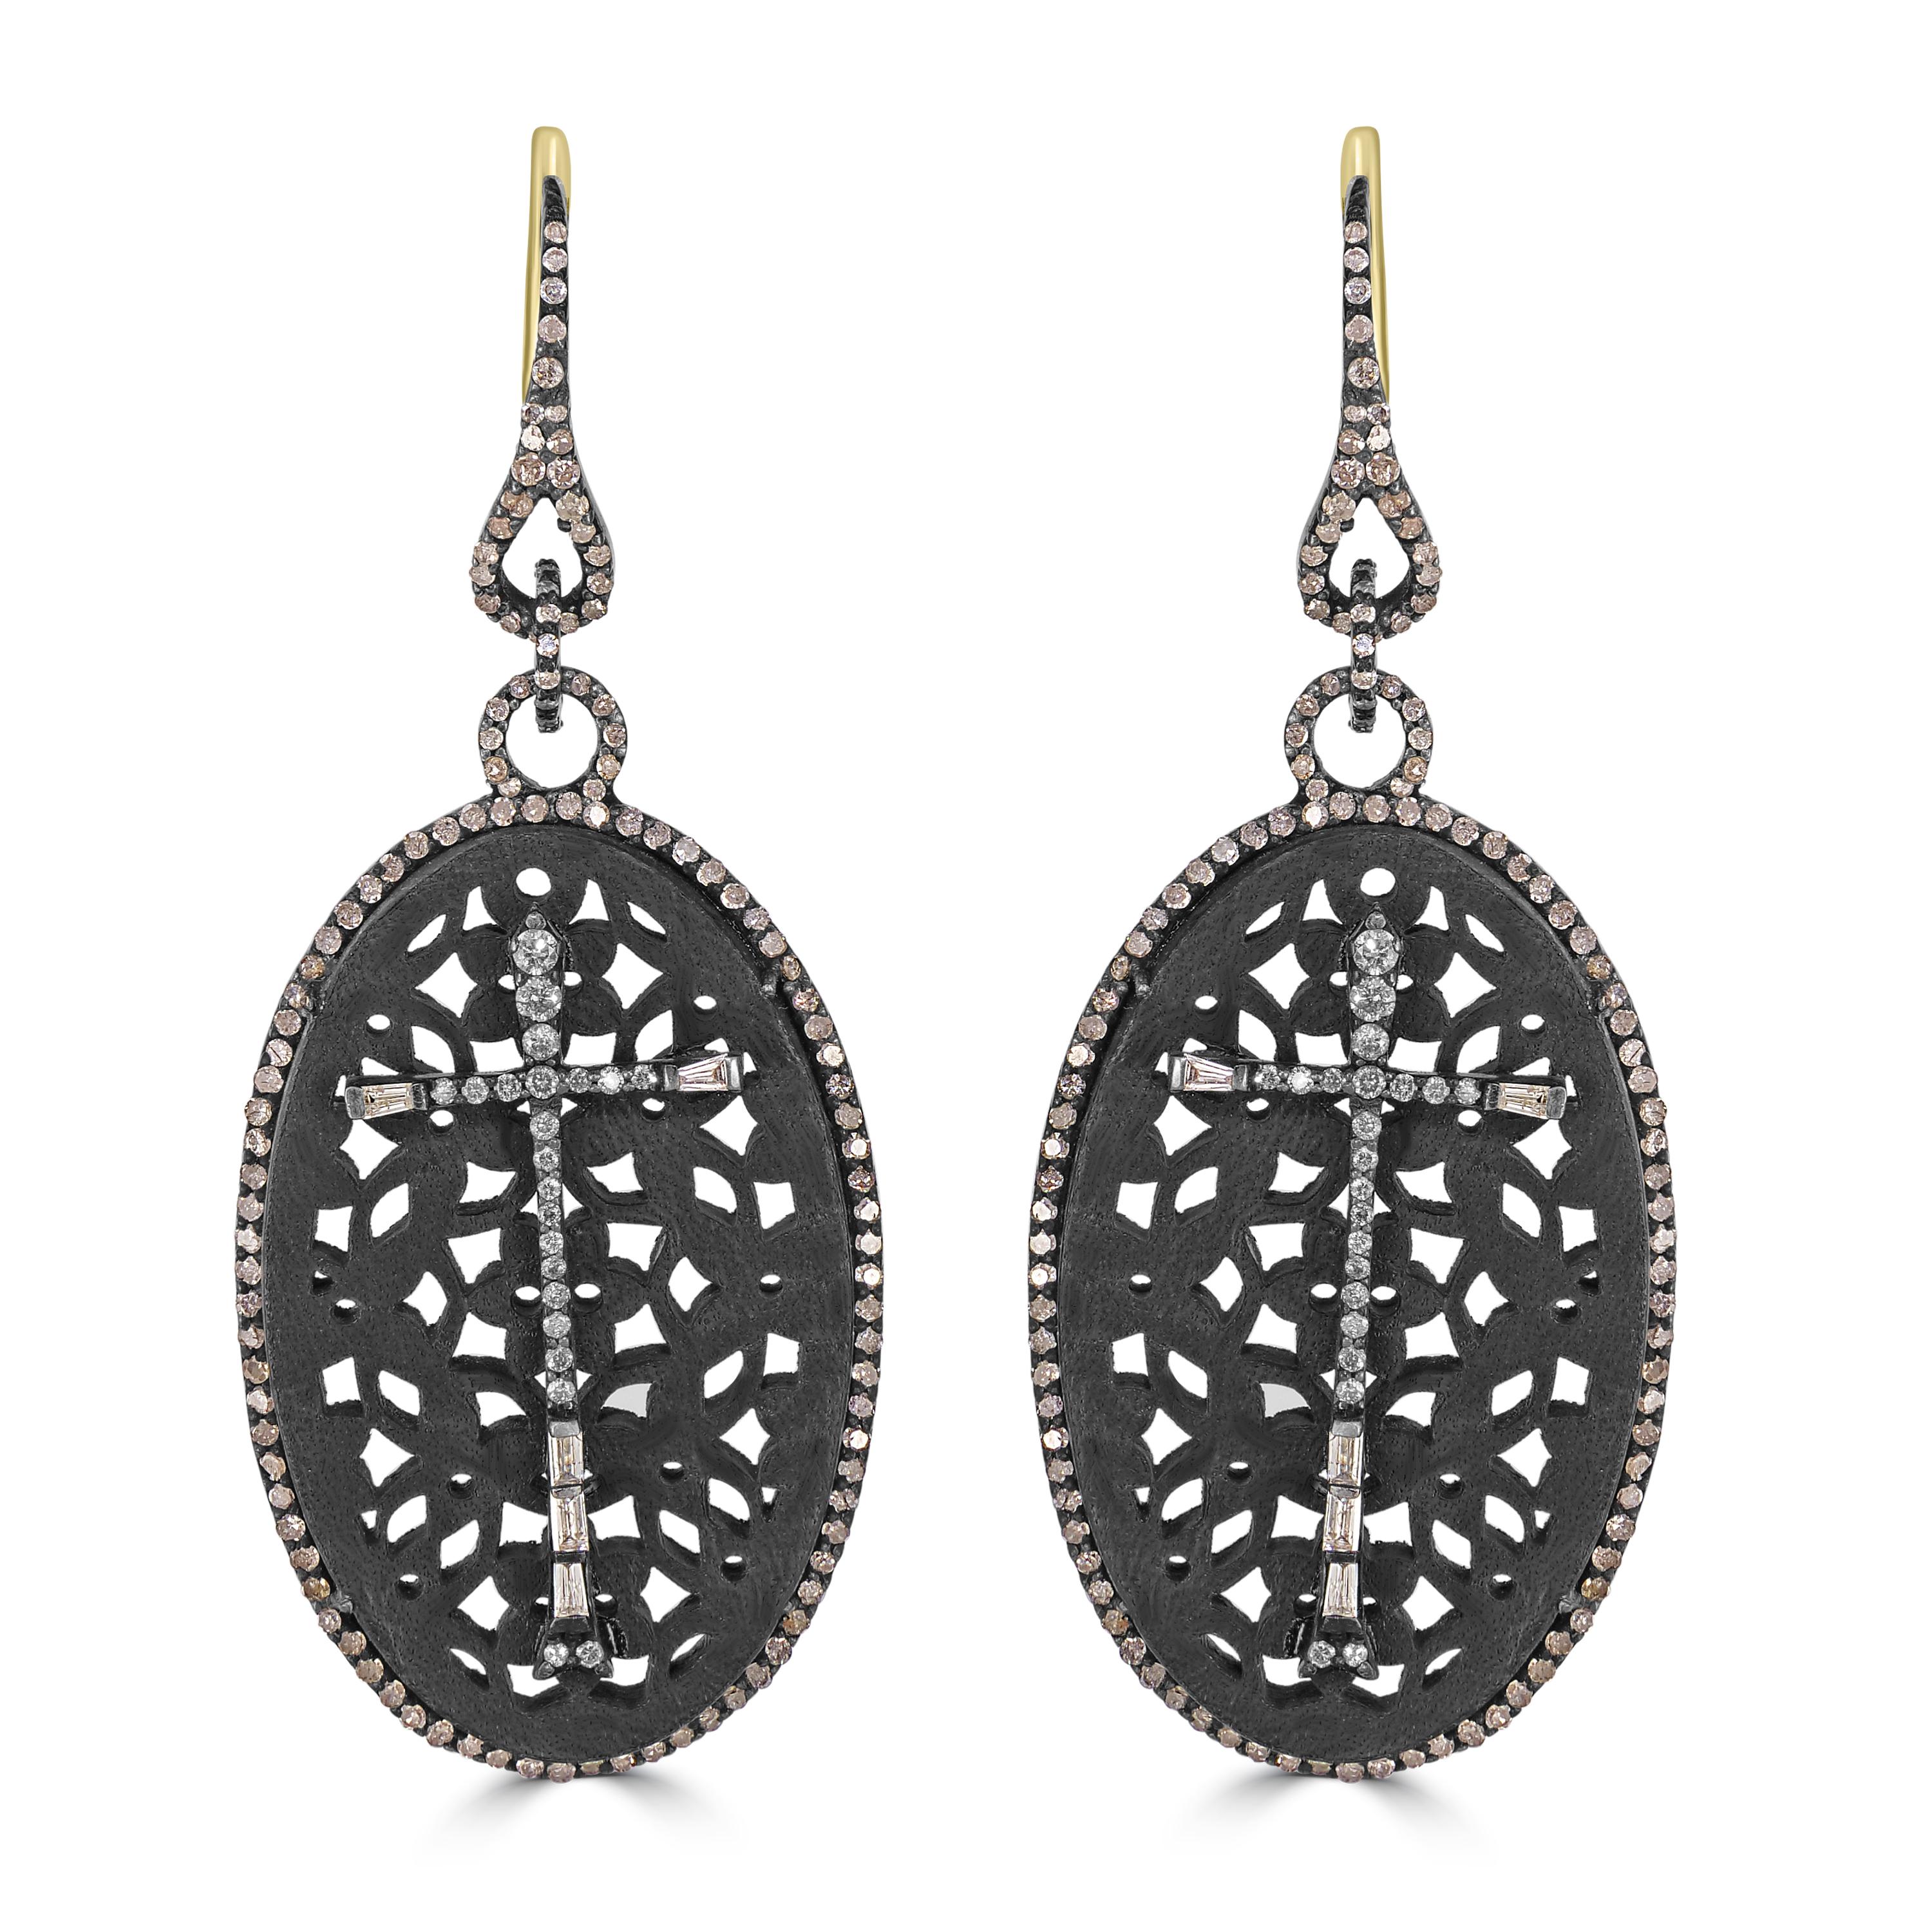 Victorian 2.95 Cttw. Diamond Oval Filigree Drop Earrings in 18k/925 In New Condition For Sale In New York, NY